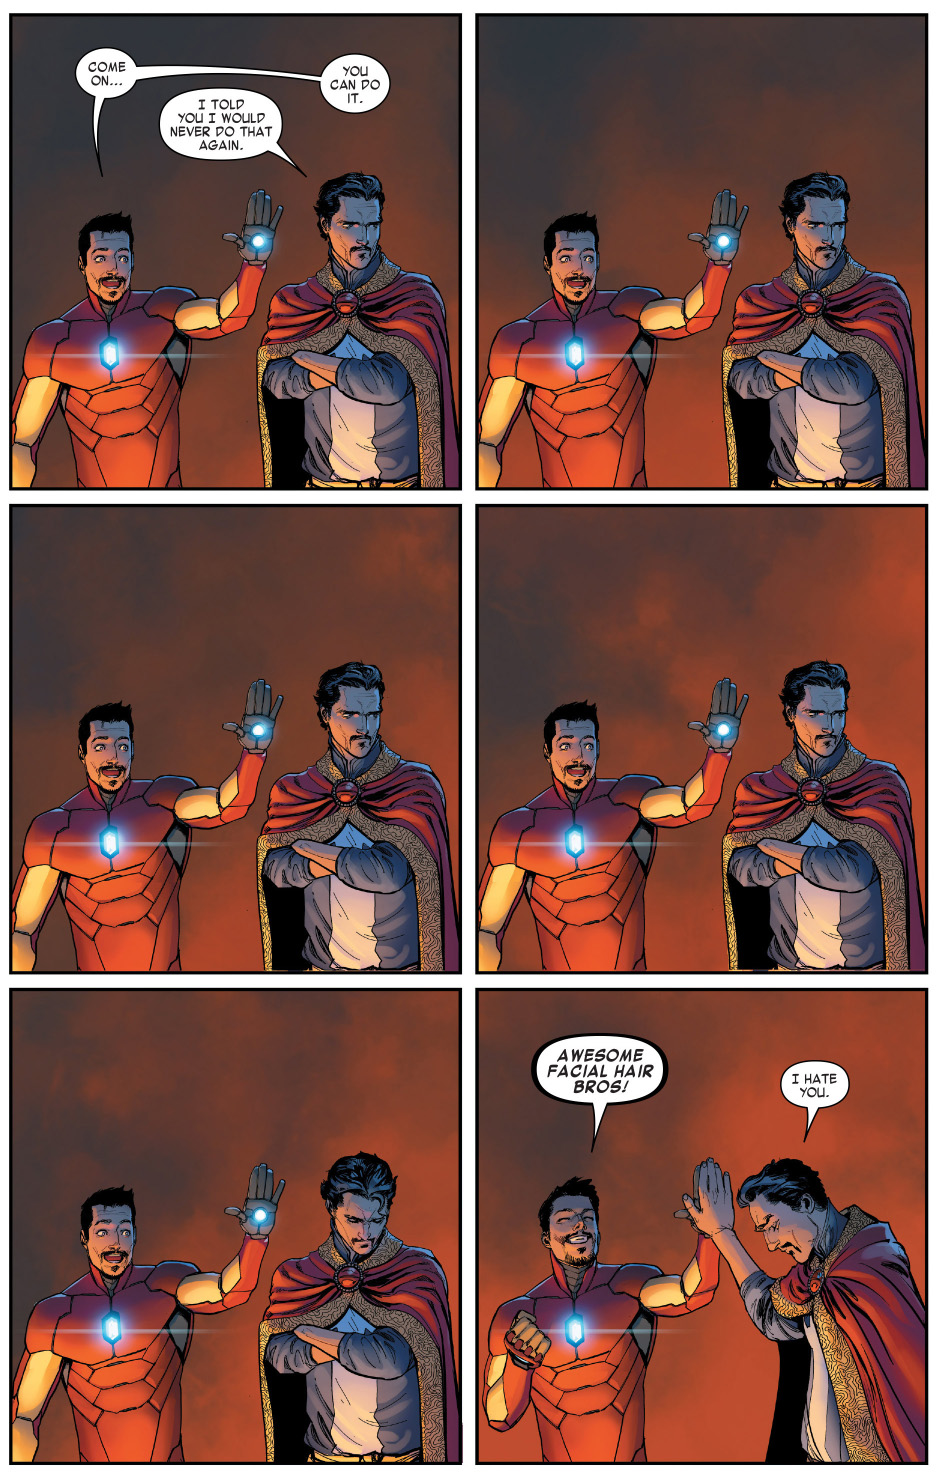 Iron Man And Doctor Strange High Fives  Comicnewbies